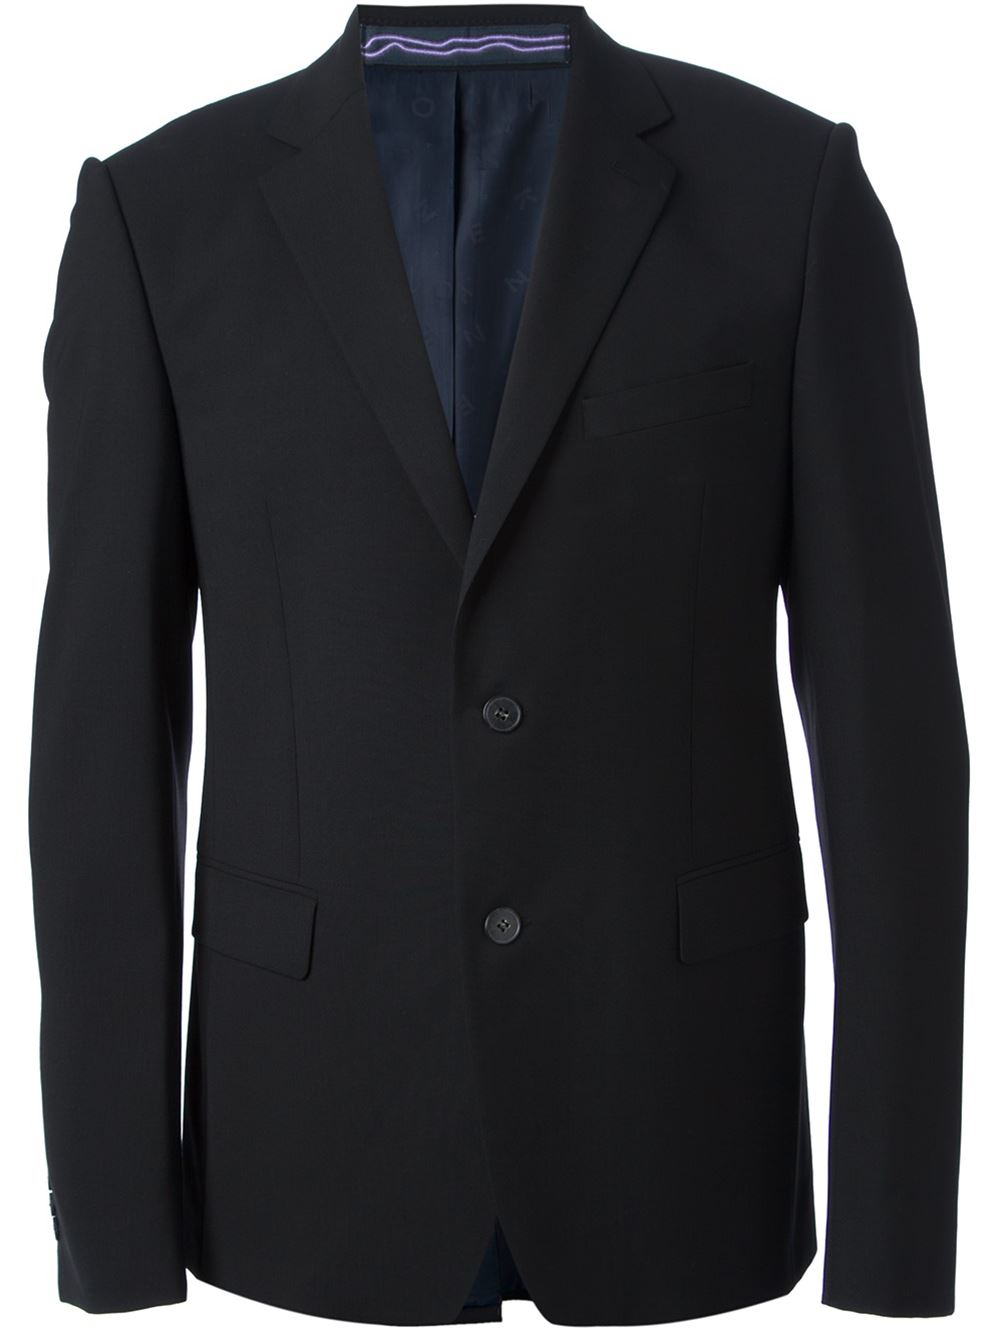 KENZO Formal Two Piece Suit in Black for Men - Lyst